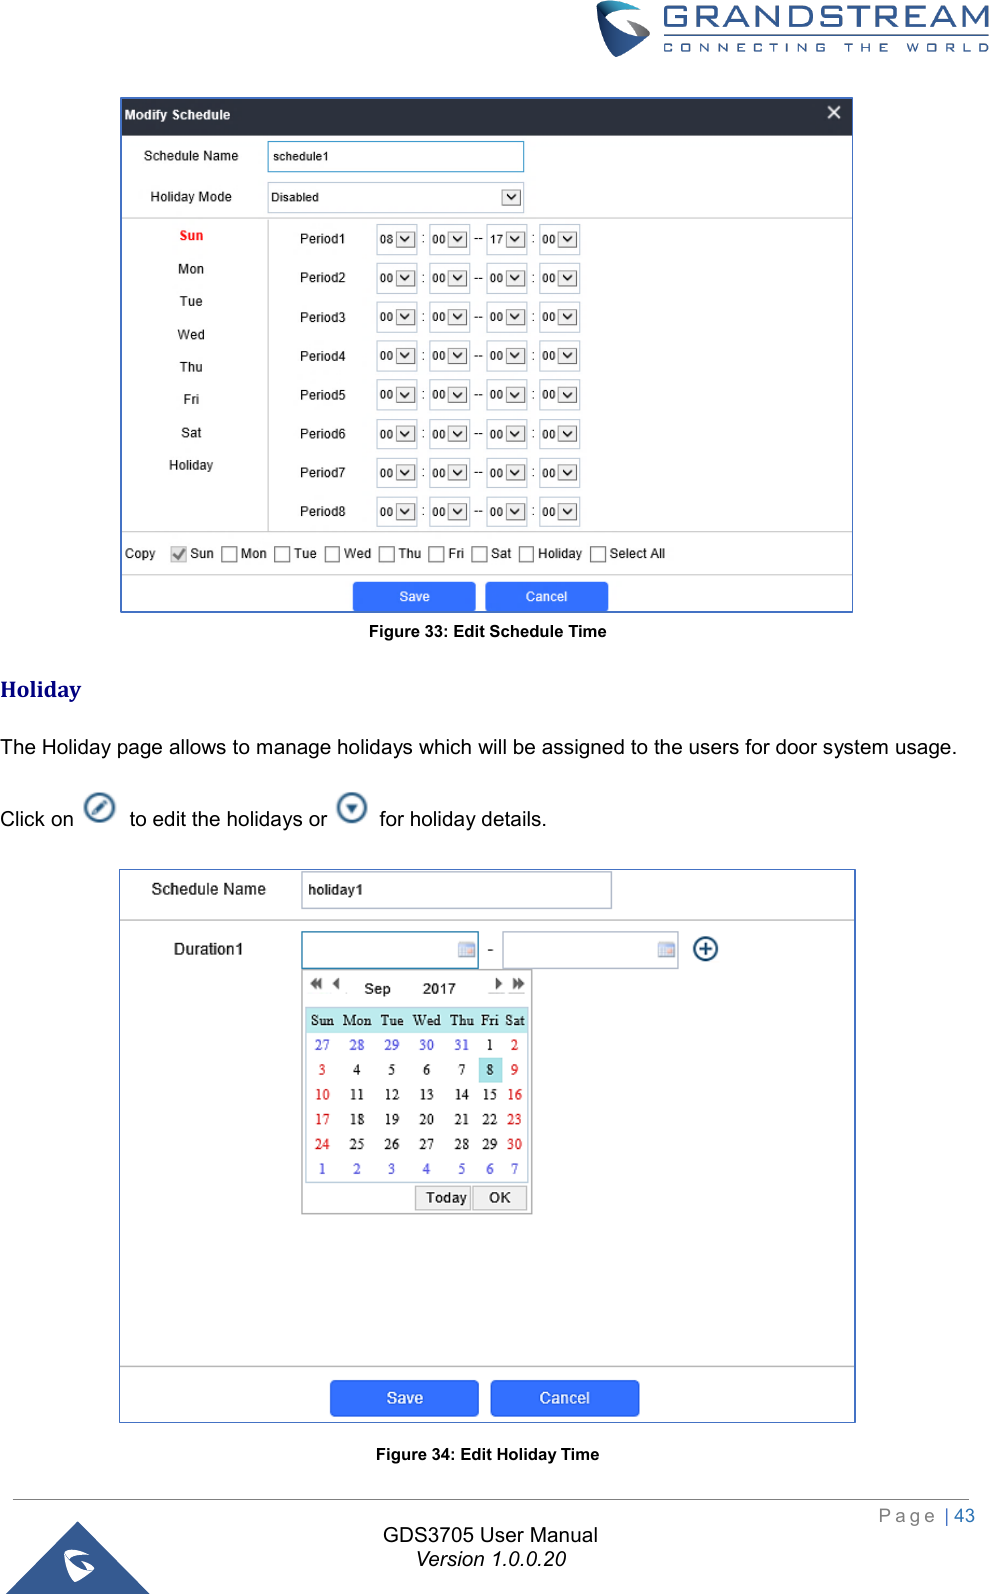                                                                         P a g e  | 43  GDS3705 User Manual Version 1.0.0.20  Figure 33: Edit Schedule Time Holiday The Holiday page allows to manage holidays which will be assigned to the users for door system usage. Click on   to edit the holidays or   for holiday details.   Figure 34: Edit Holiday Time 